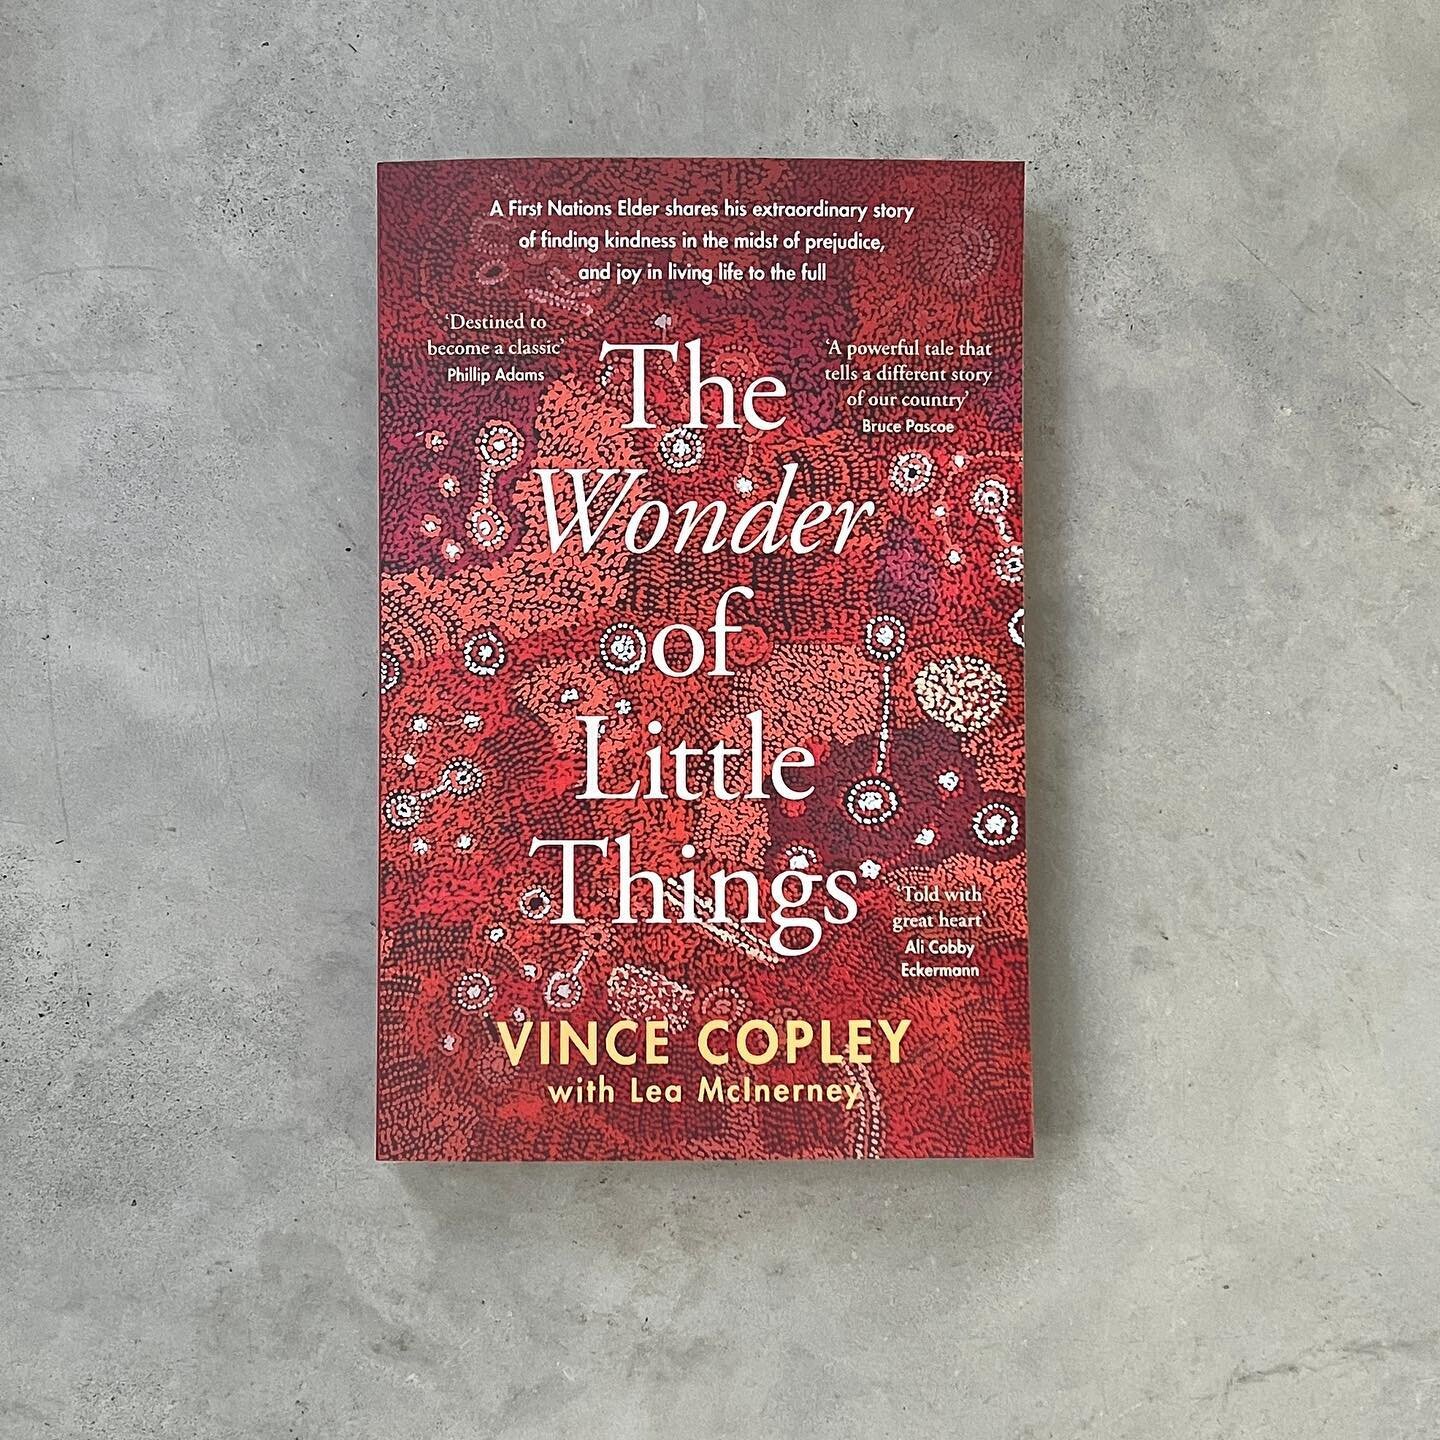 We&rsquo;re delighted to see this extraordinary story of First Nations Elder Vince Copley in bookstores today, Indigenous Literacy Day. Written with his friend Lea McInerney, this book will inspire, make you smile and make you cry in equal measure. 
